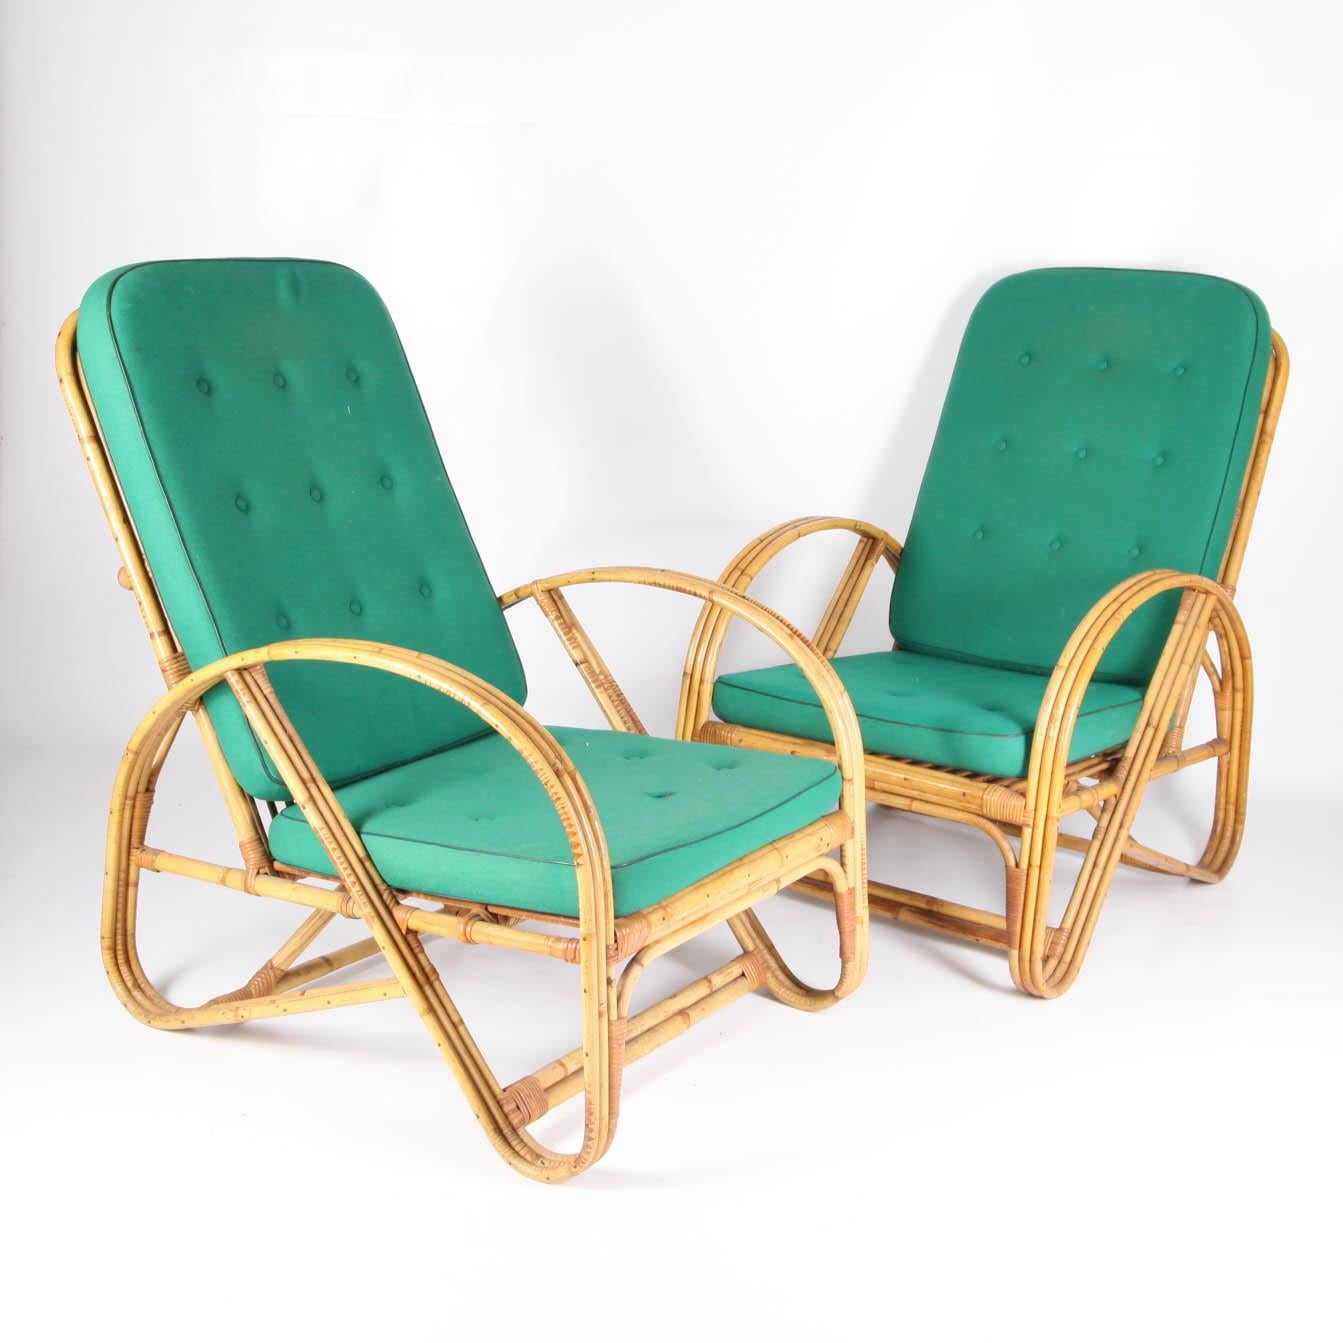 Vintage rattan armchairs/ lounge chairs. In the style of Audoux Minet, vivai del sud etc…